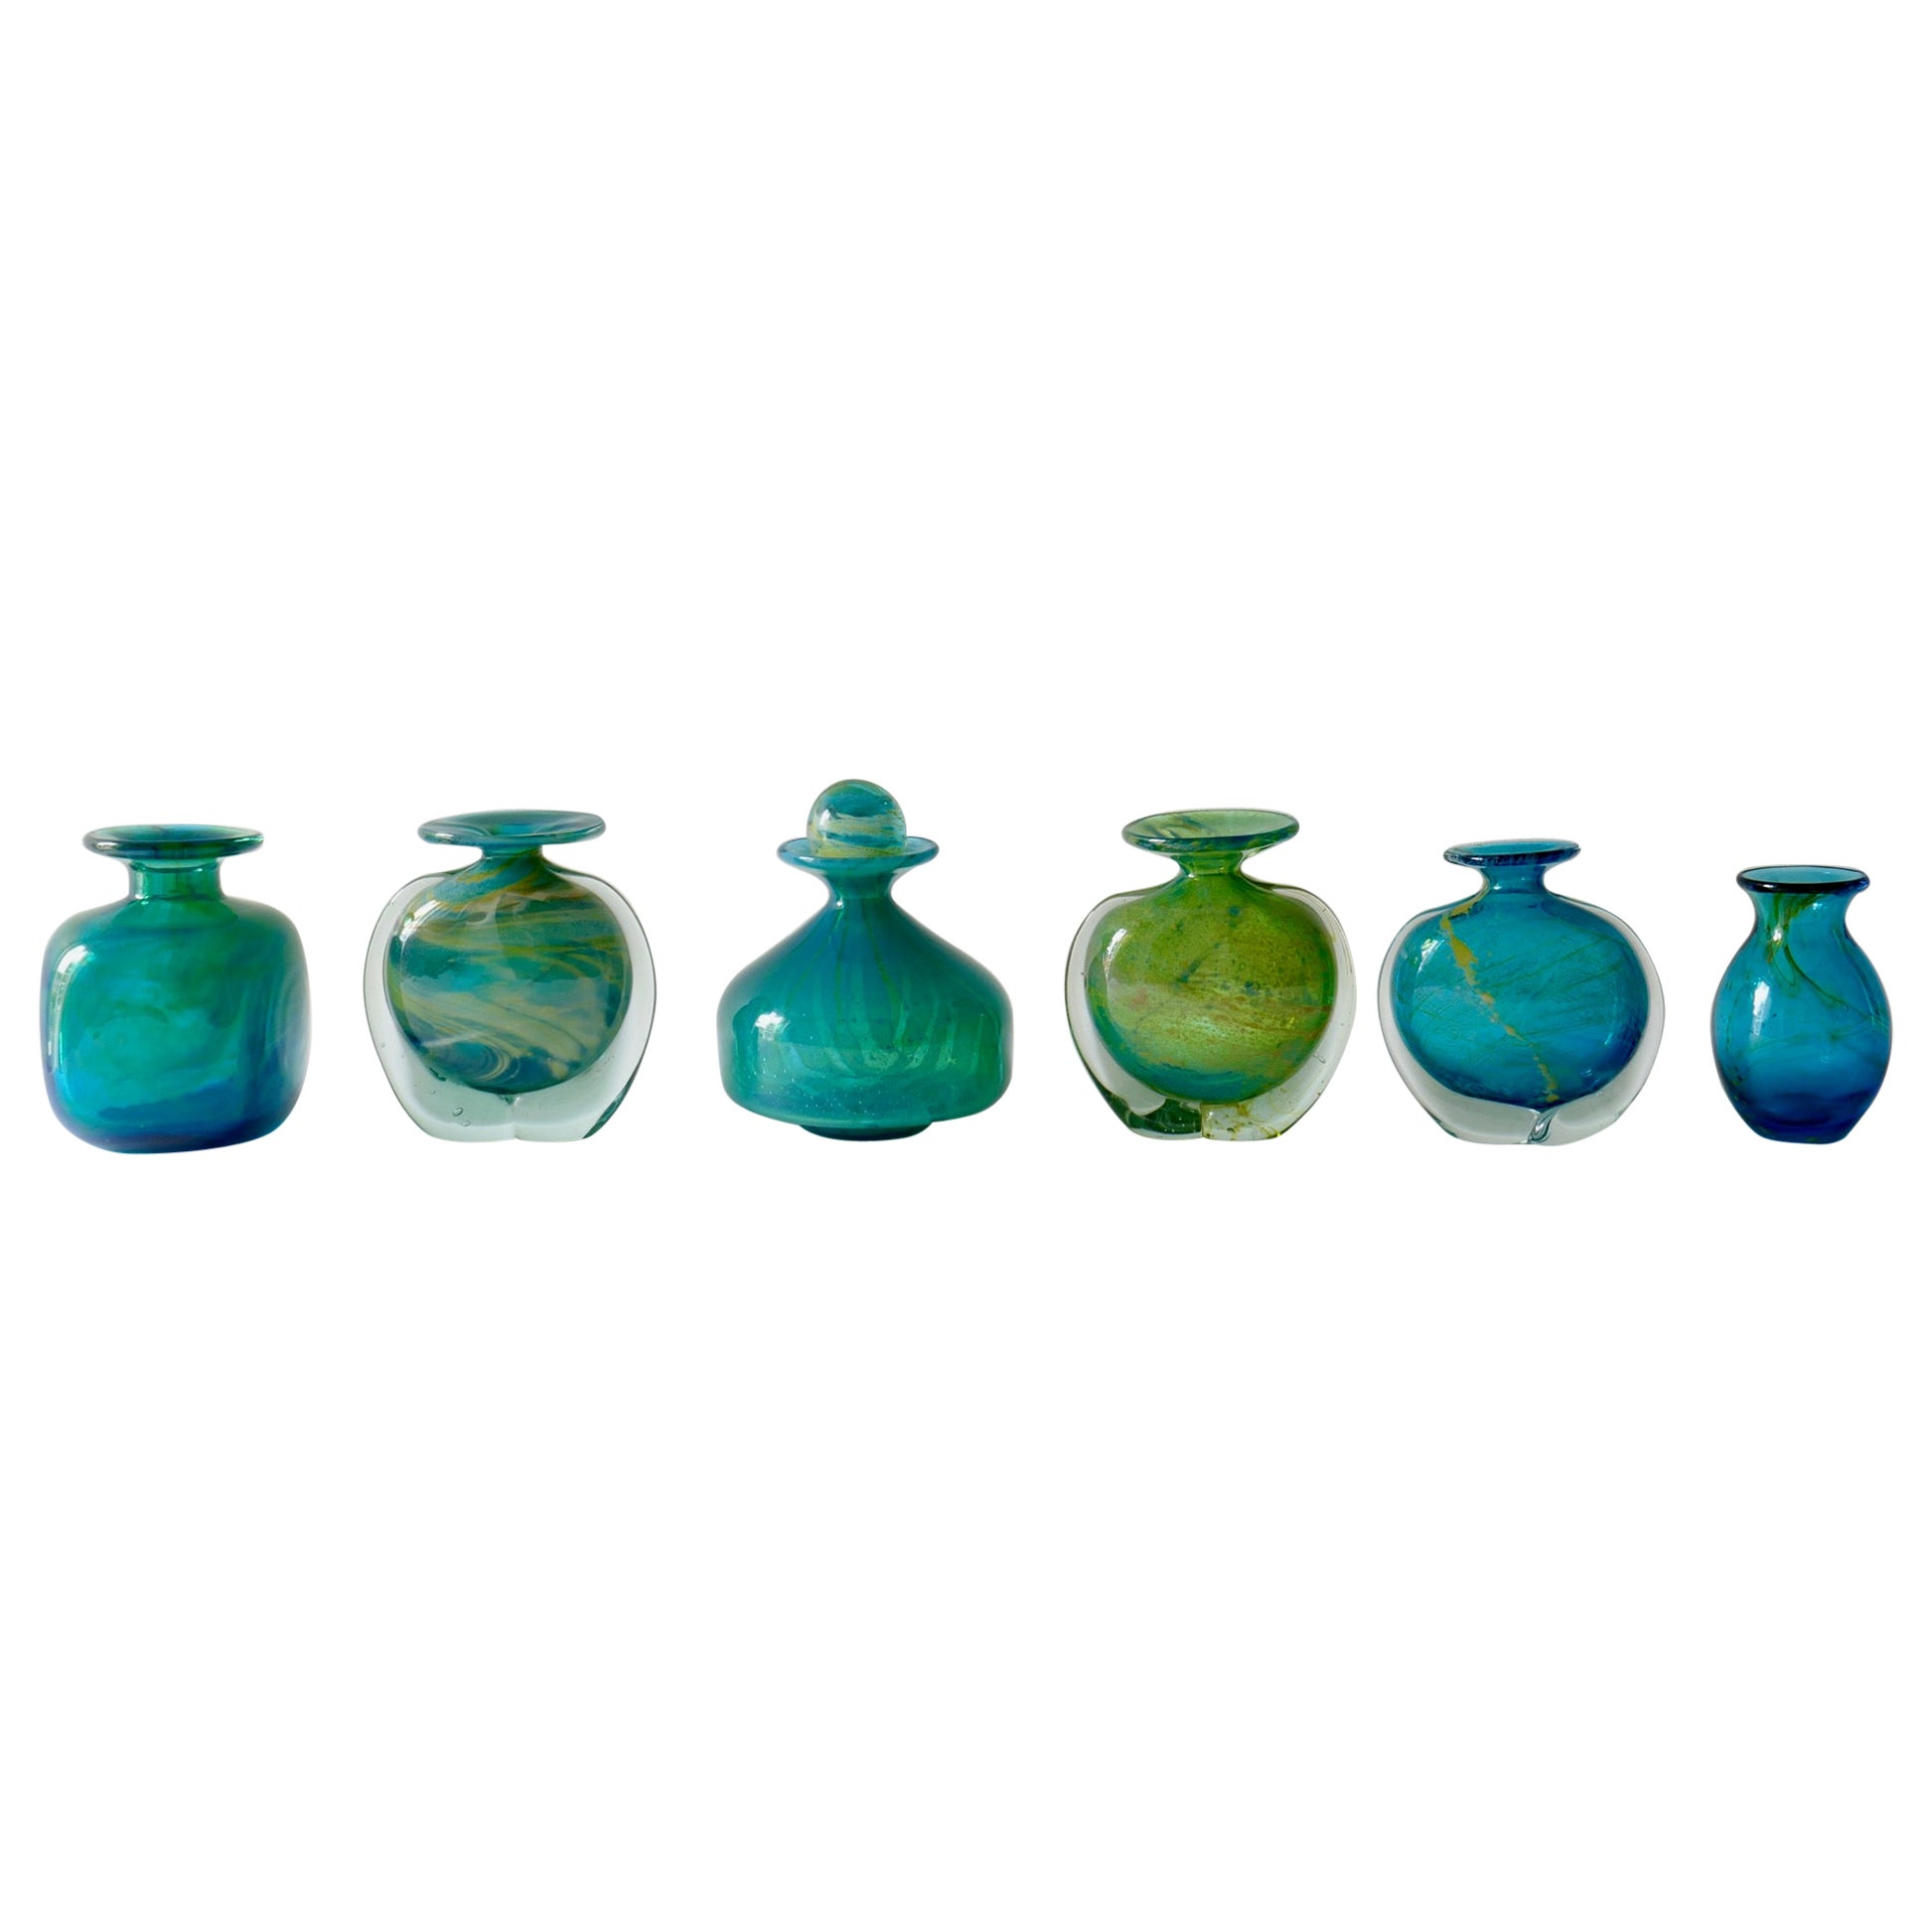 Set of 6 Mdina Turquoise Blue and Green Glass Vases, 1960s